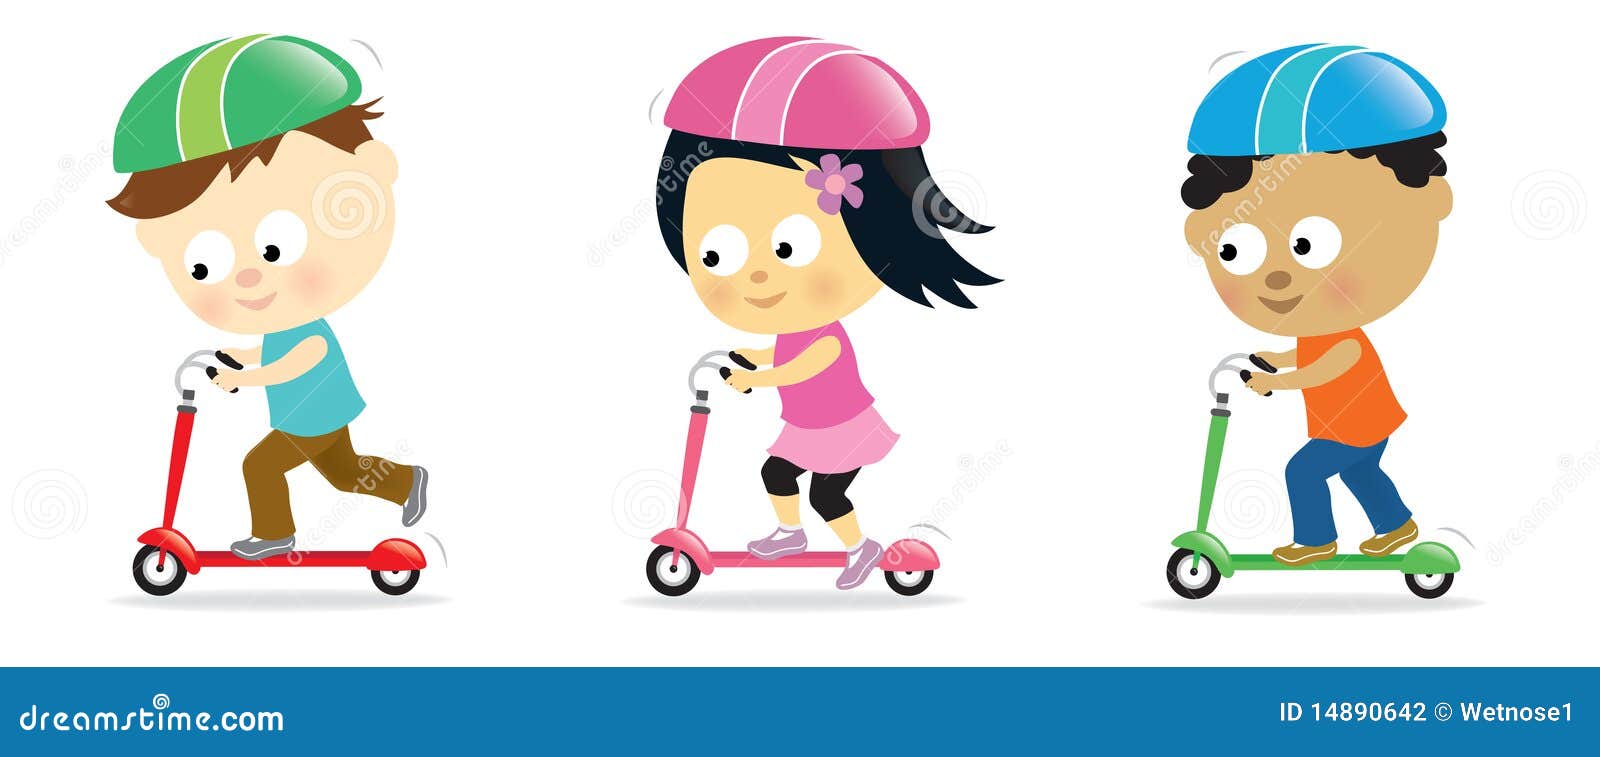 kids on scooters